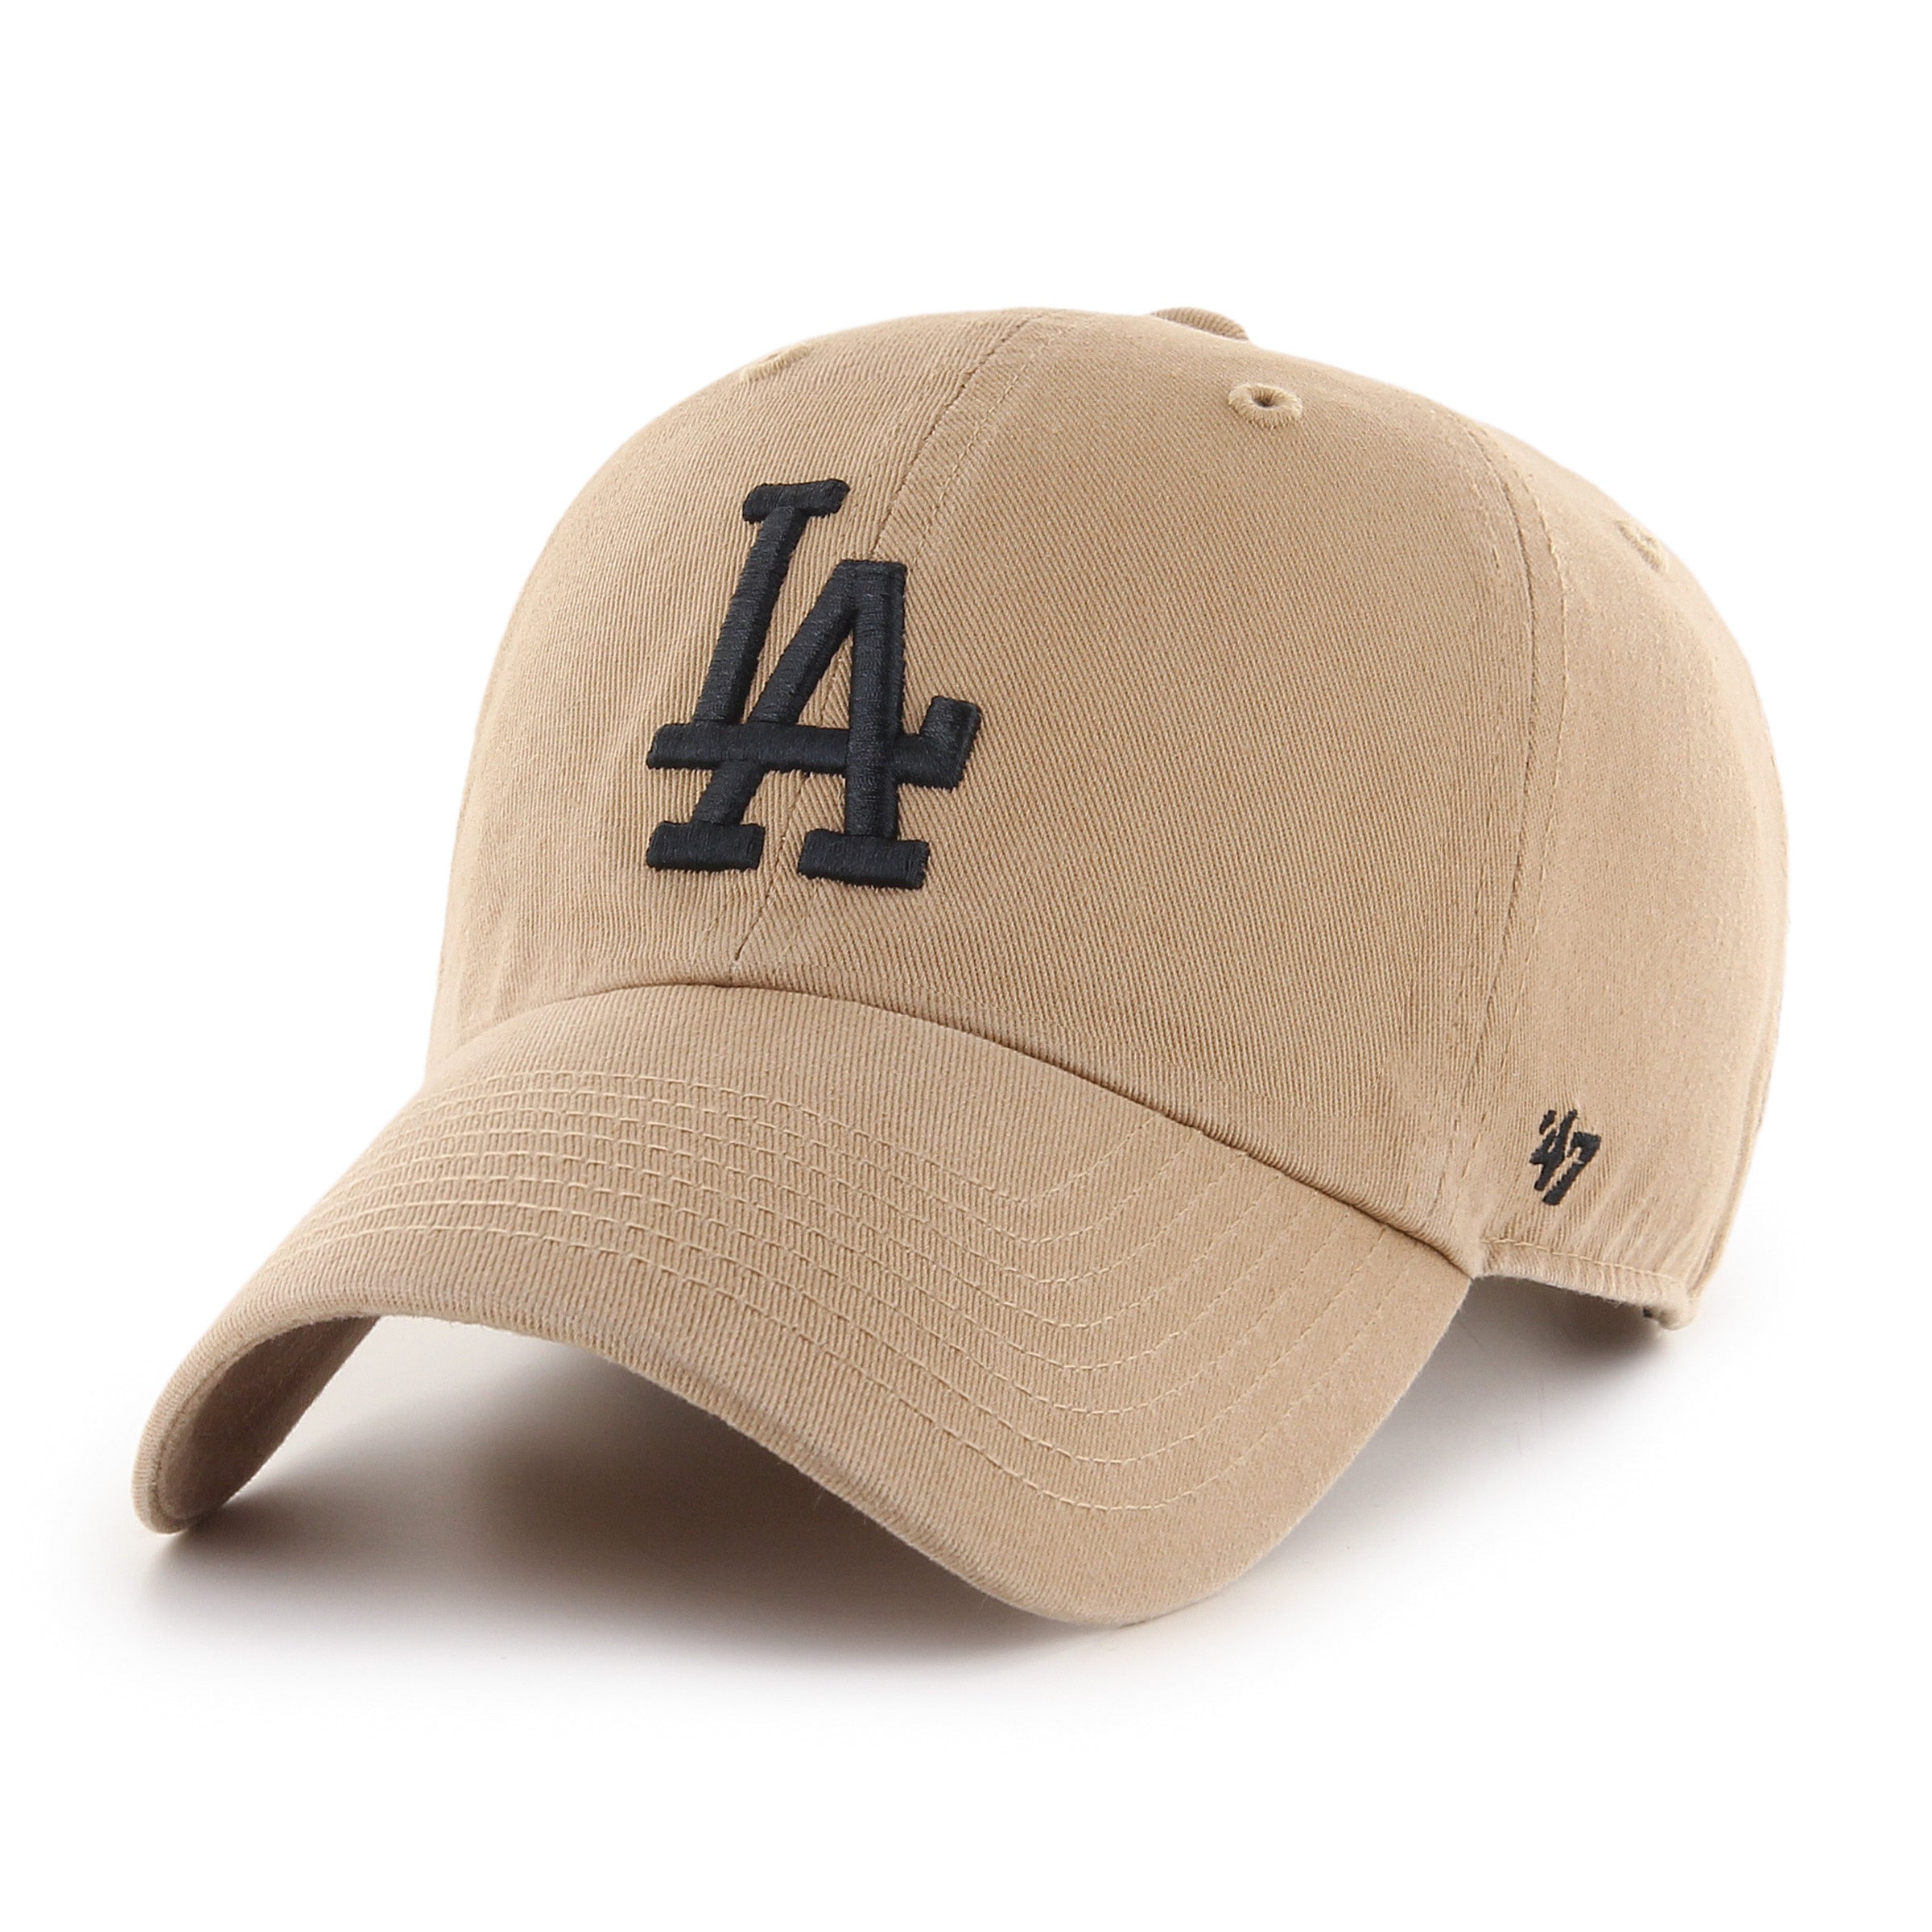 Los Angeles Dodgers '47 CLEAN UP